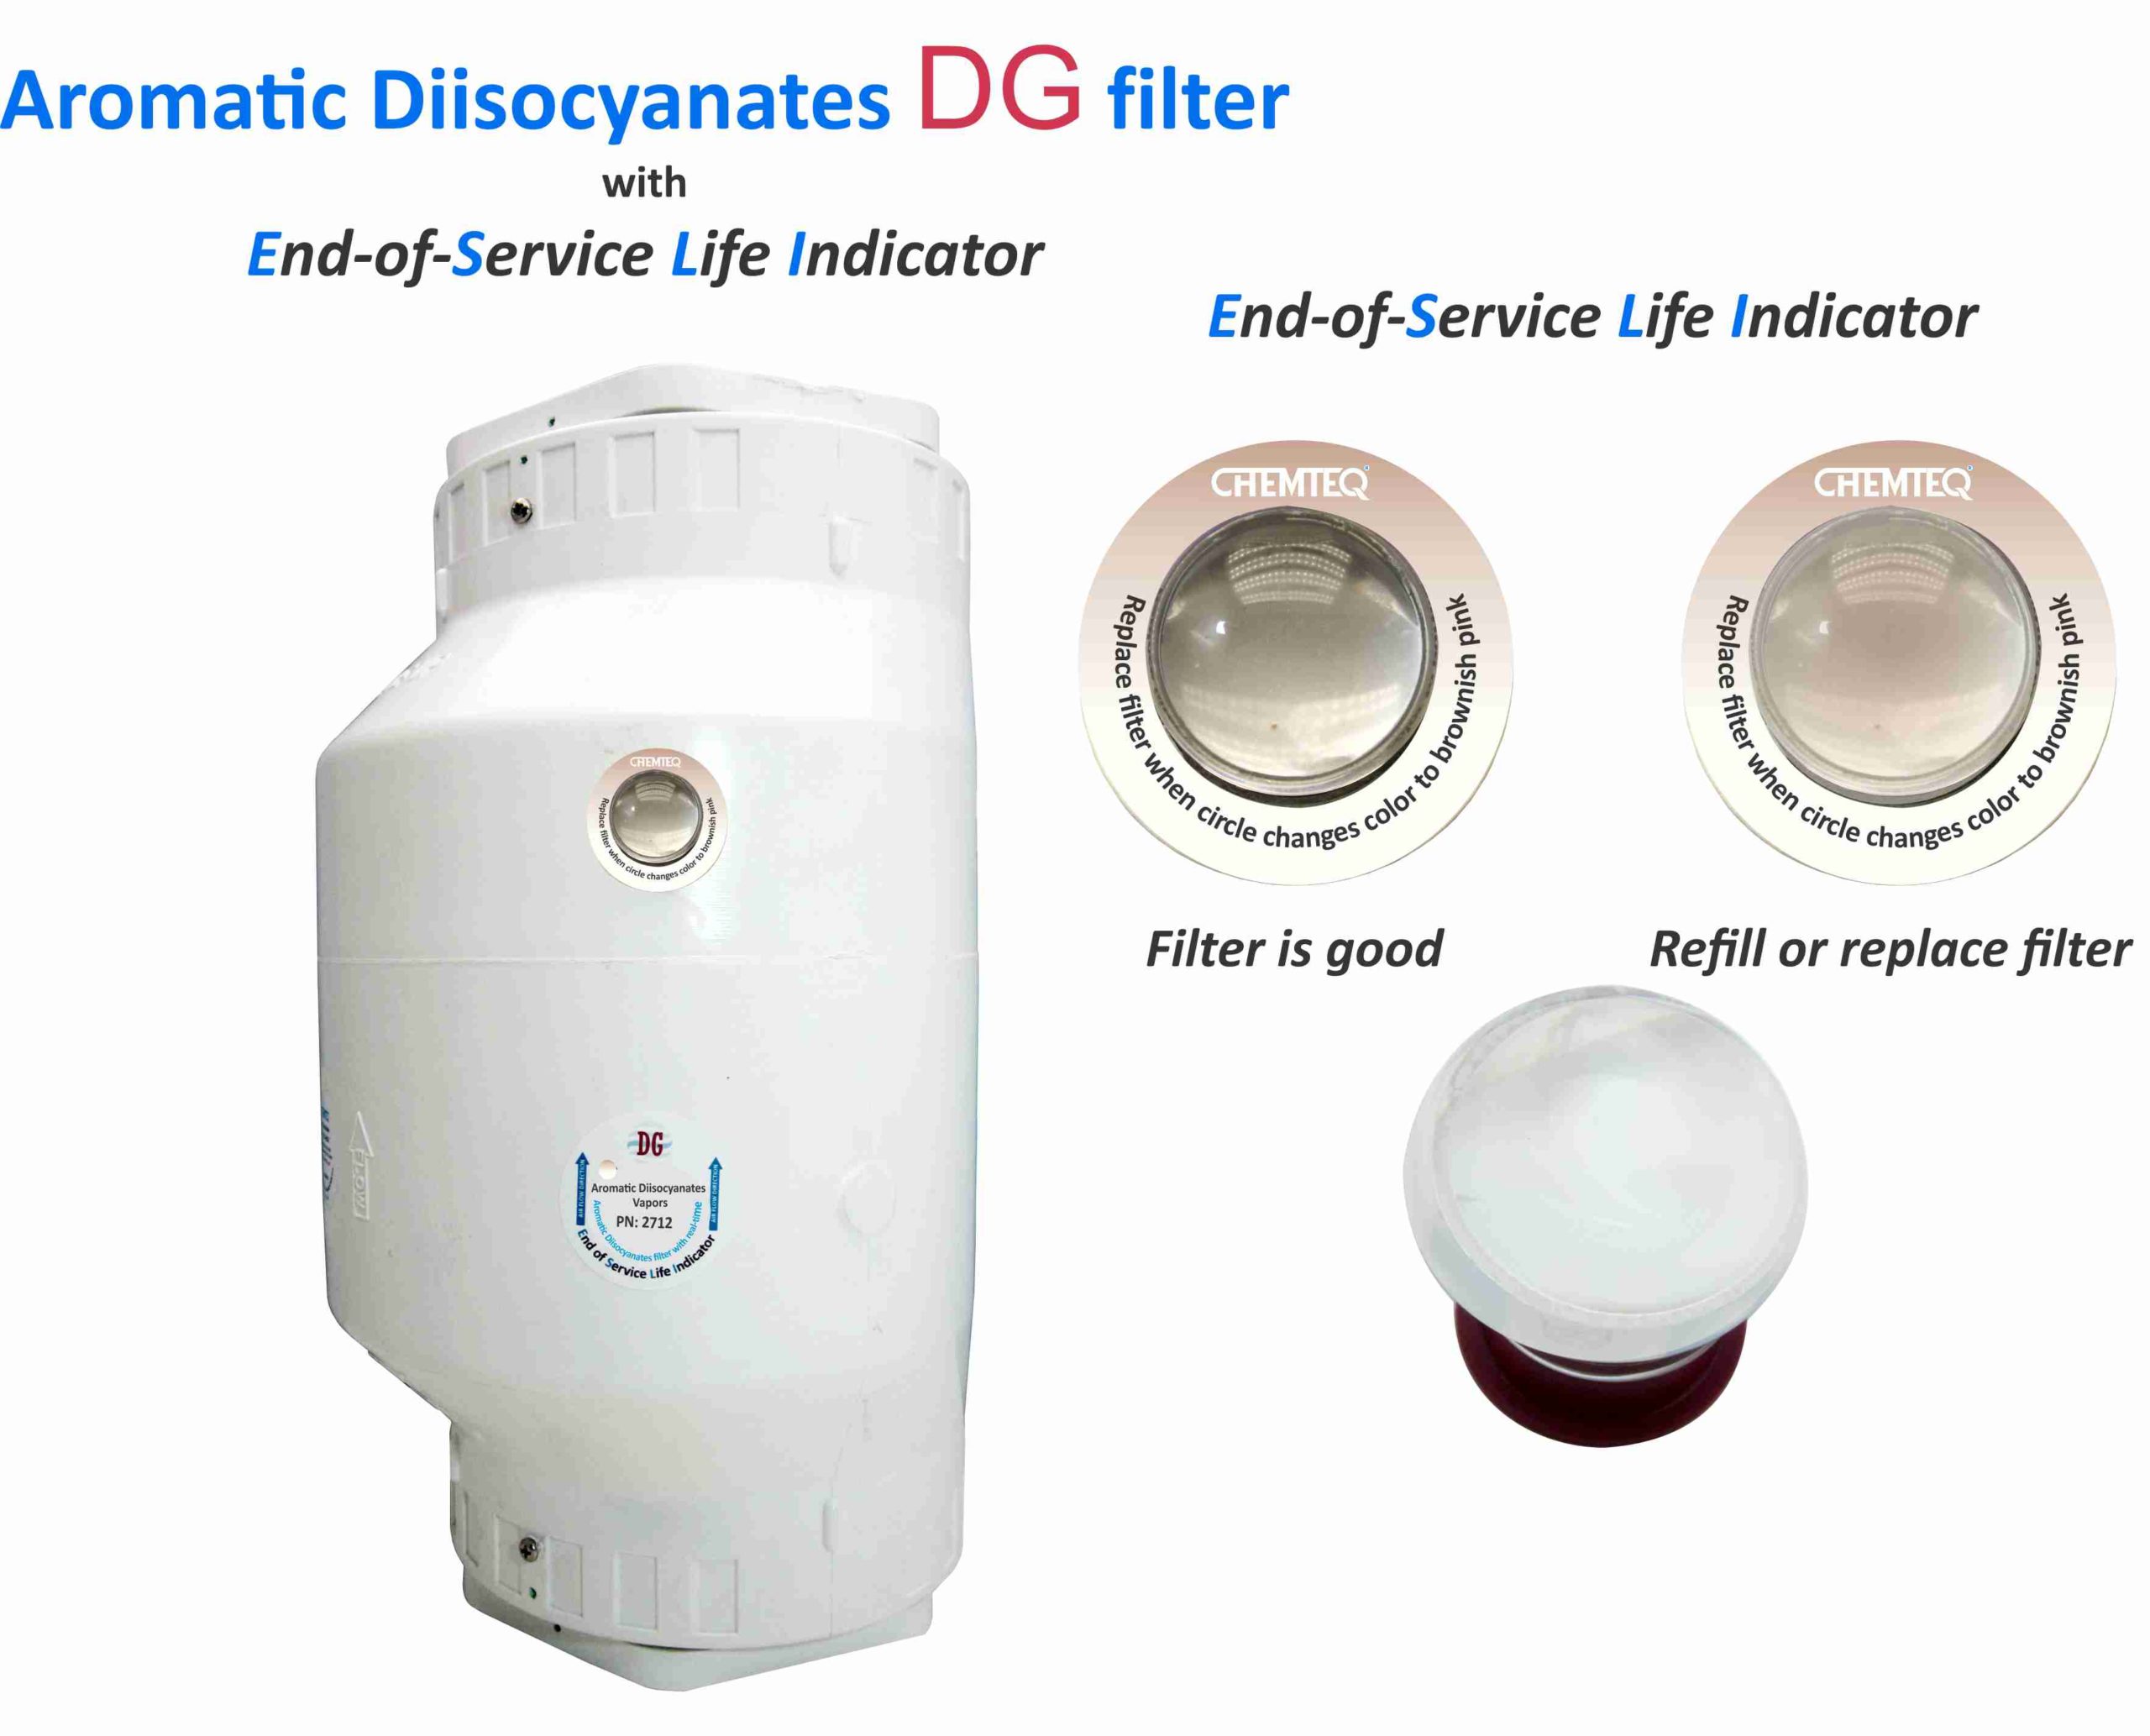 Aromatic Diisocyanates DG FILTER-ESLI-2712. Aromatic Diisocyanates filter with end-of-service life indicator suitable Chemical Processes